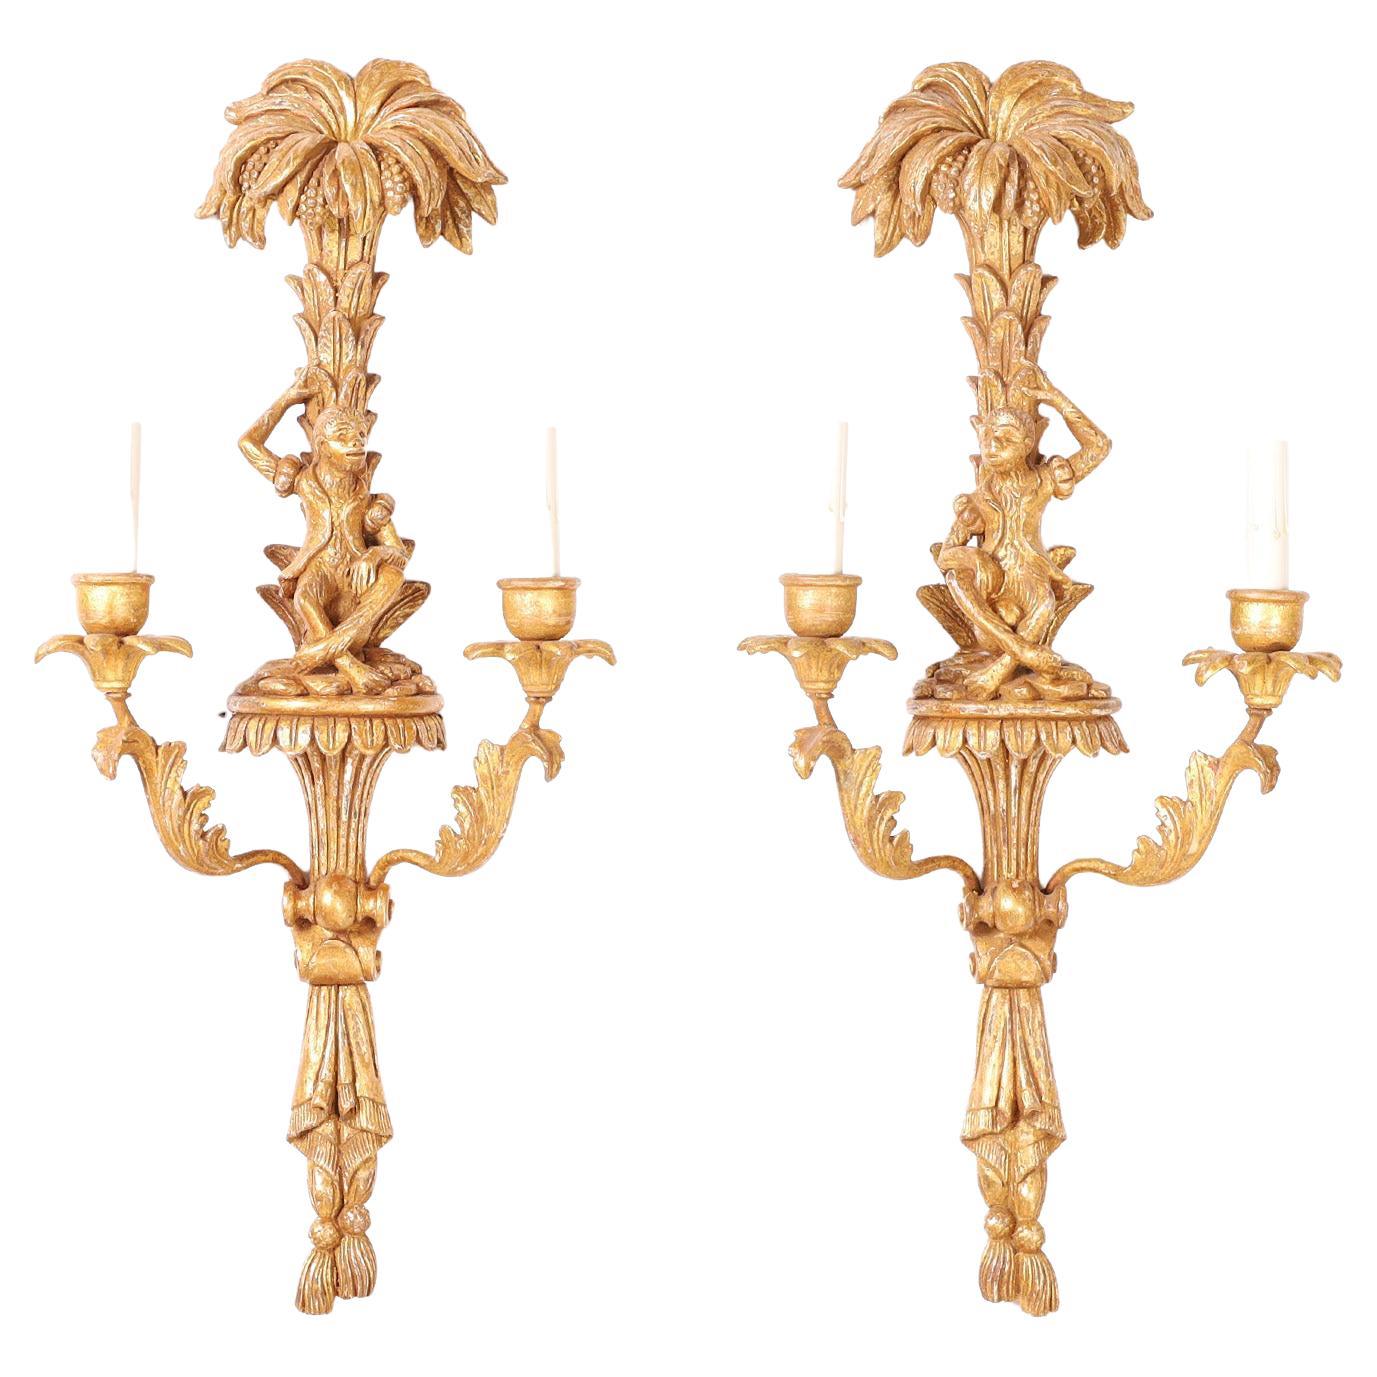 Pair of Antique Carved Wood Italian Wall Sconces with Monkeys